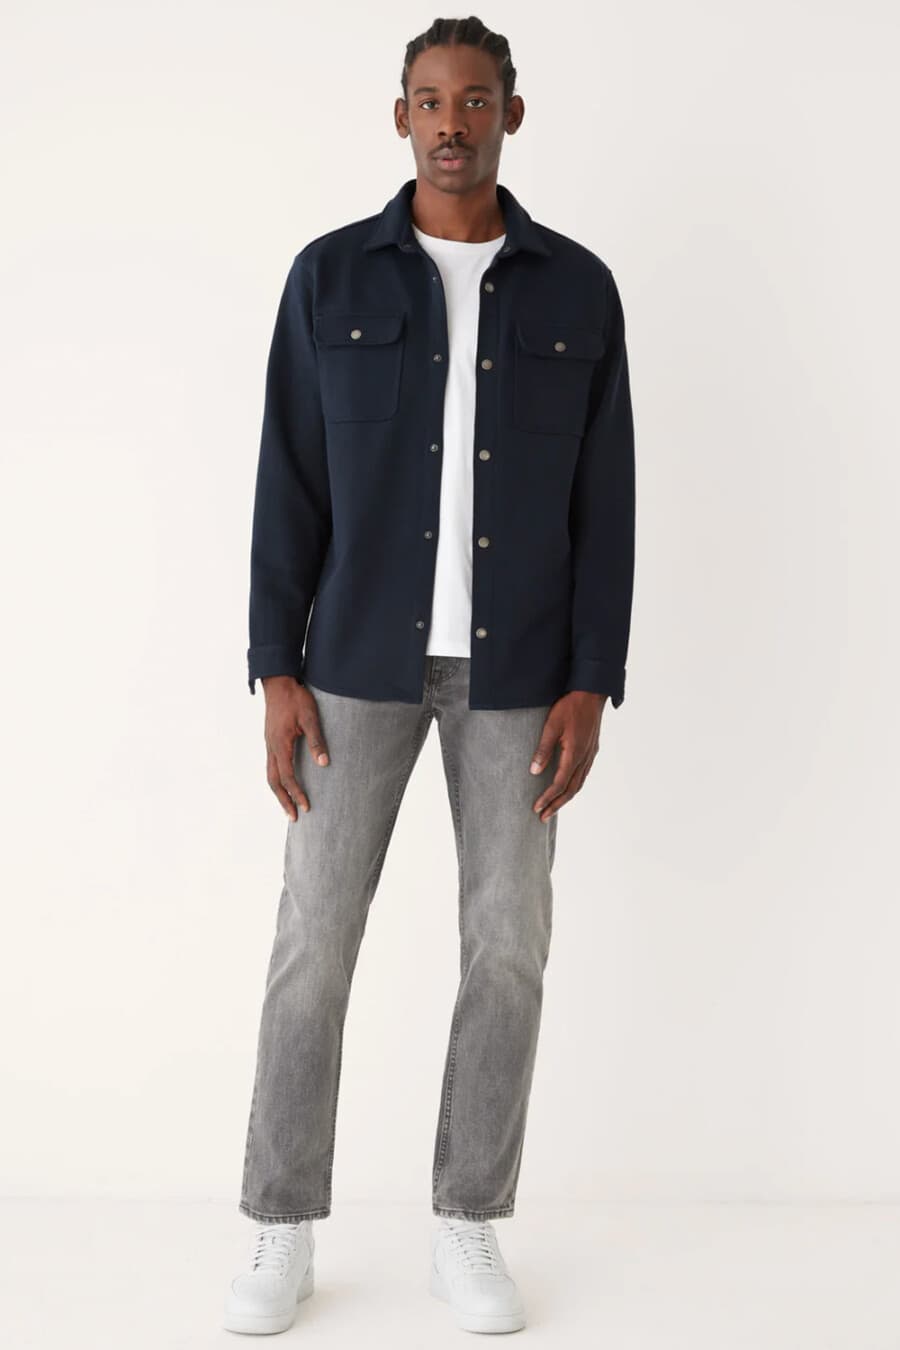 Men's grey jeans, white T-shirt, navy overshirt and white sneakers outfit